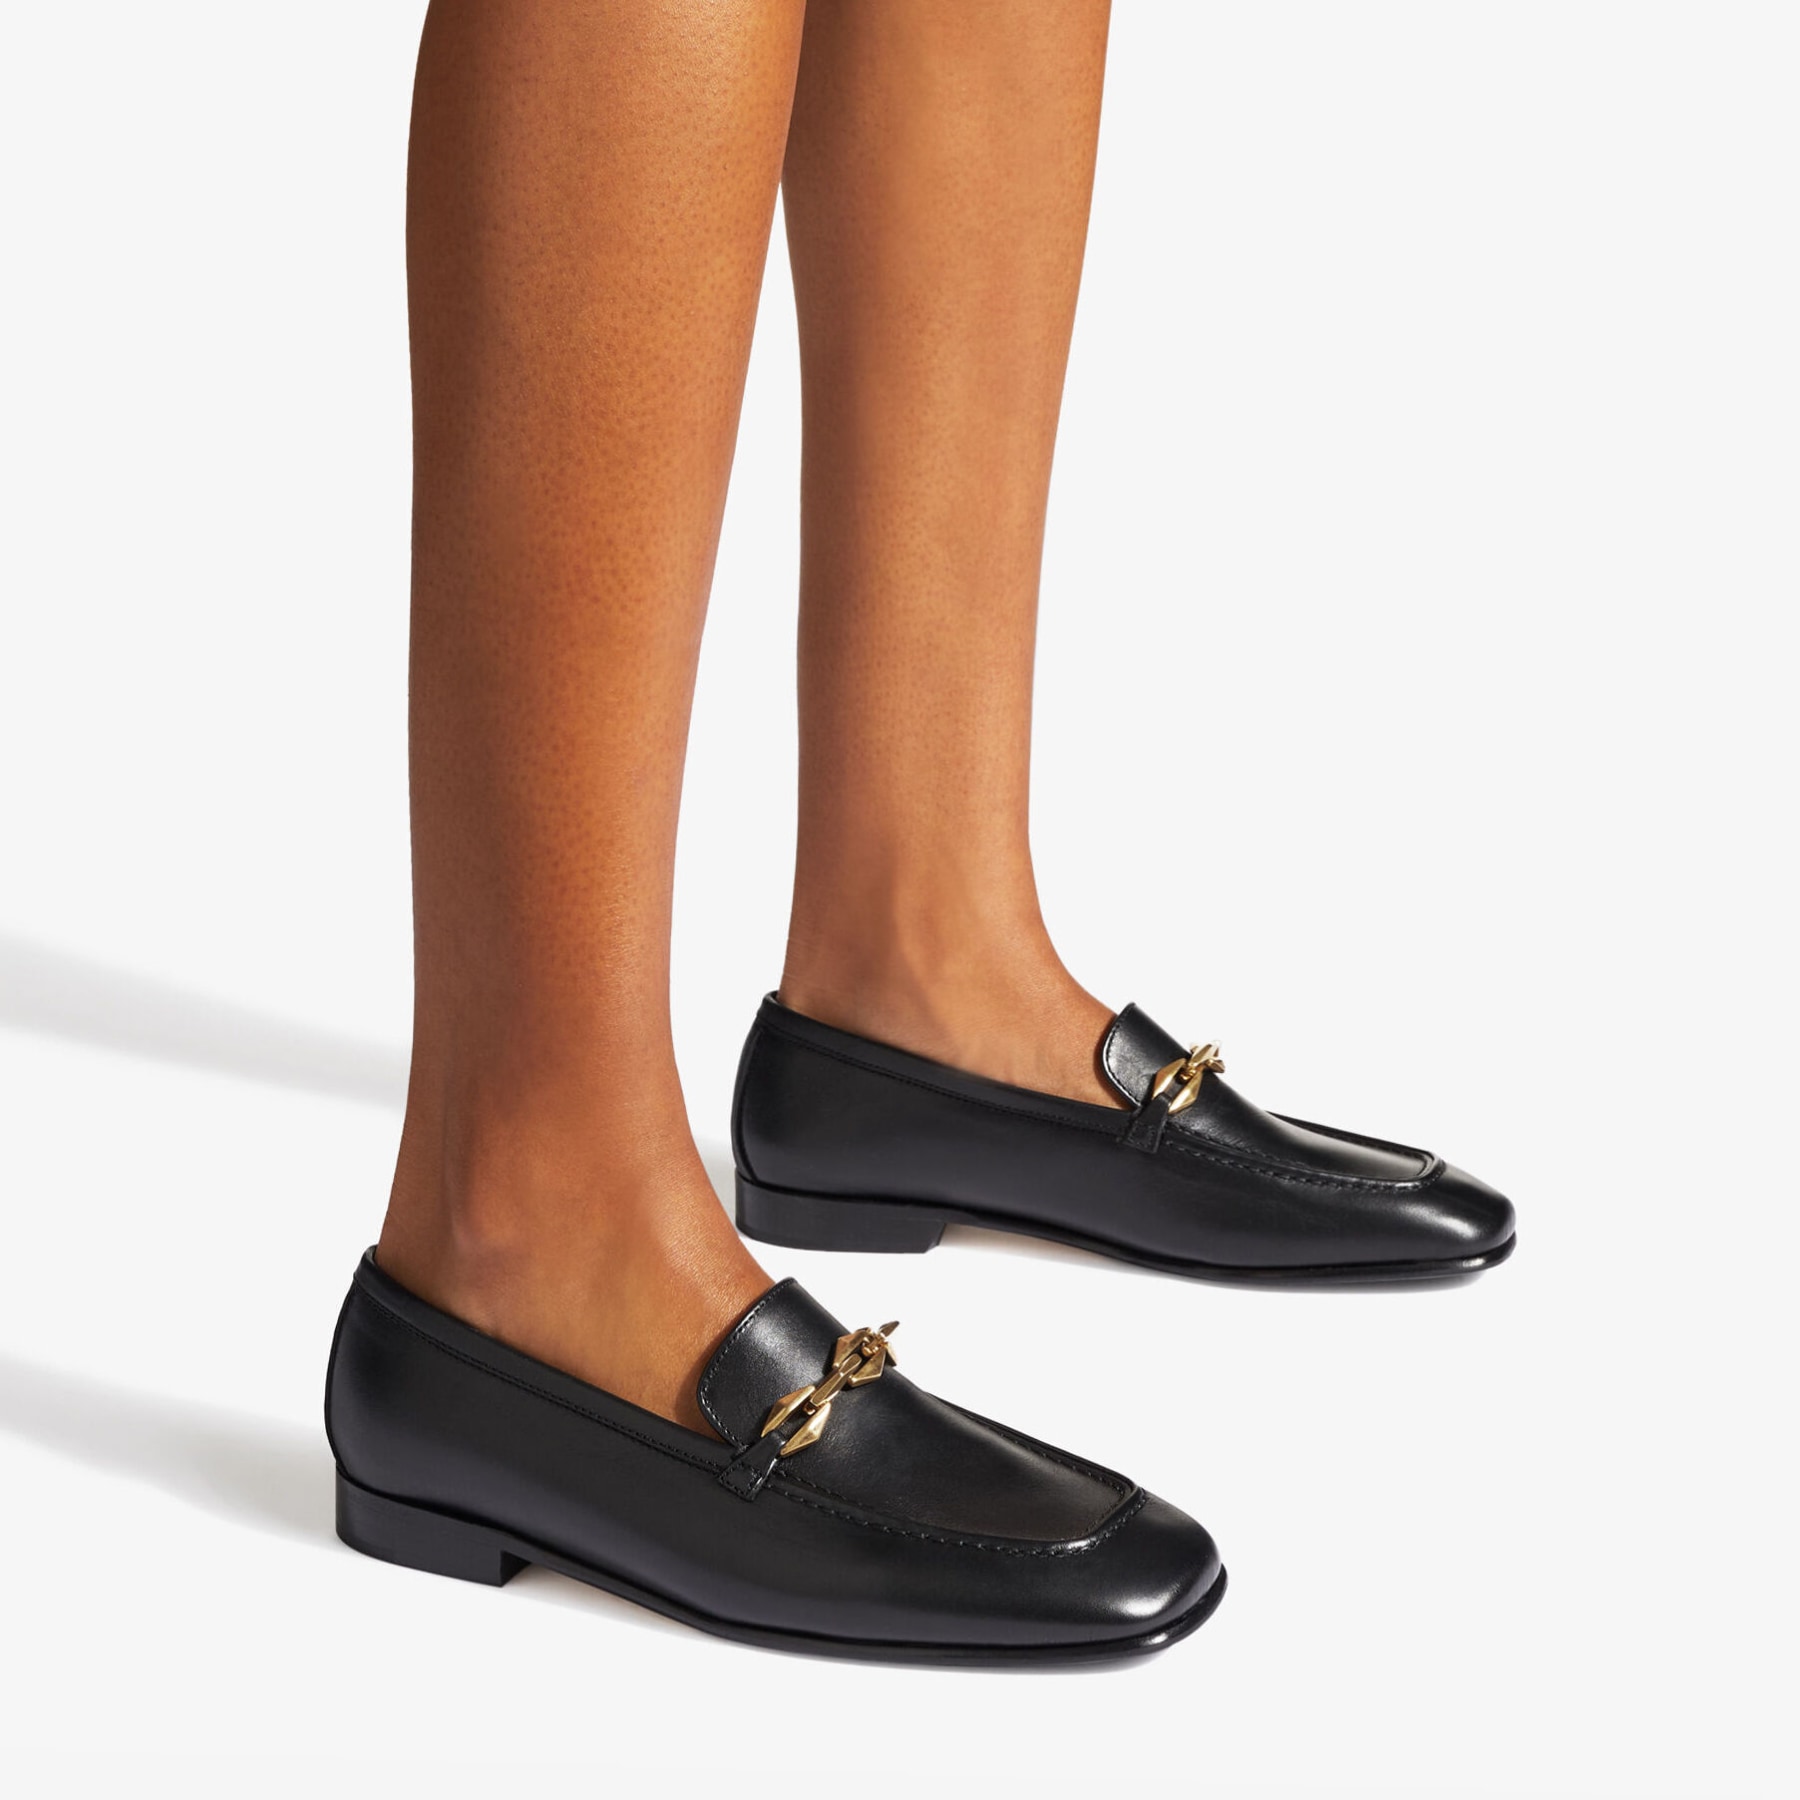 DIAMOND TILDA LOAFER | Black Calf Leather Loafers with Chain 